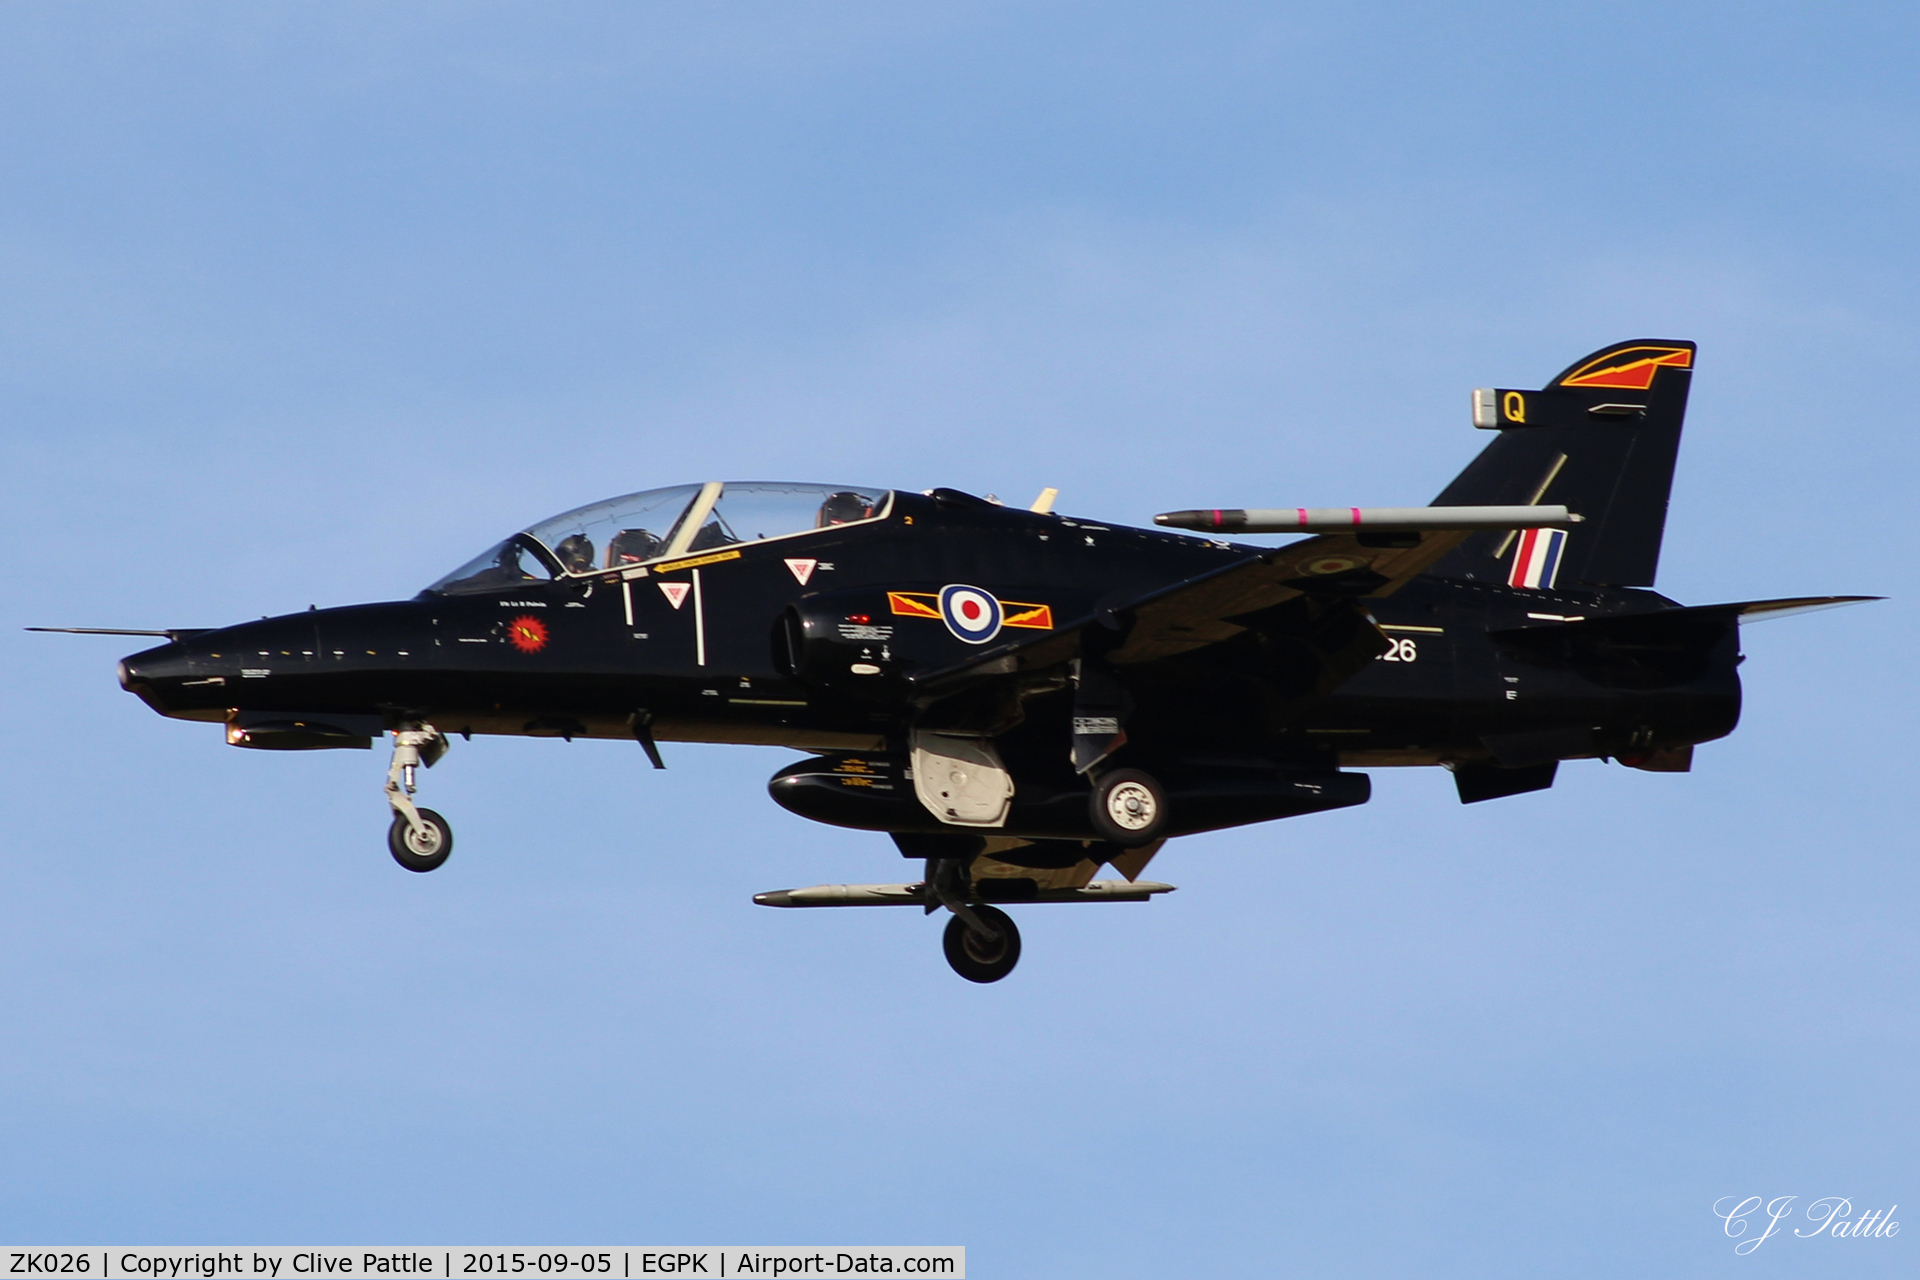 ZK026, 2009 British Aerospace Hawk T2 C/N RT017/1255, Landing back at Prestwick EGPK after displaying with the RAF Hawk T.2 Role Demo duo at the Scottish Airshow 2015 held at Ayr seafront and Prestwick Airport EGPK and at Portrush, Northern Ireland on the same day.